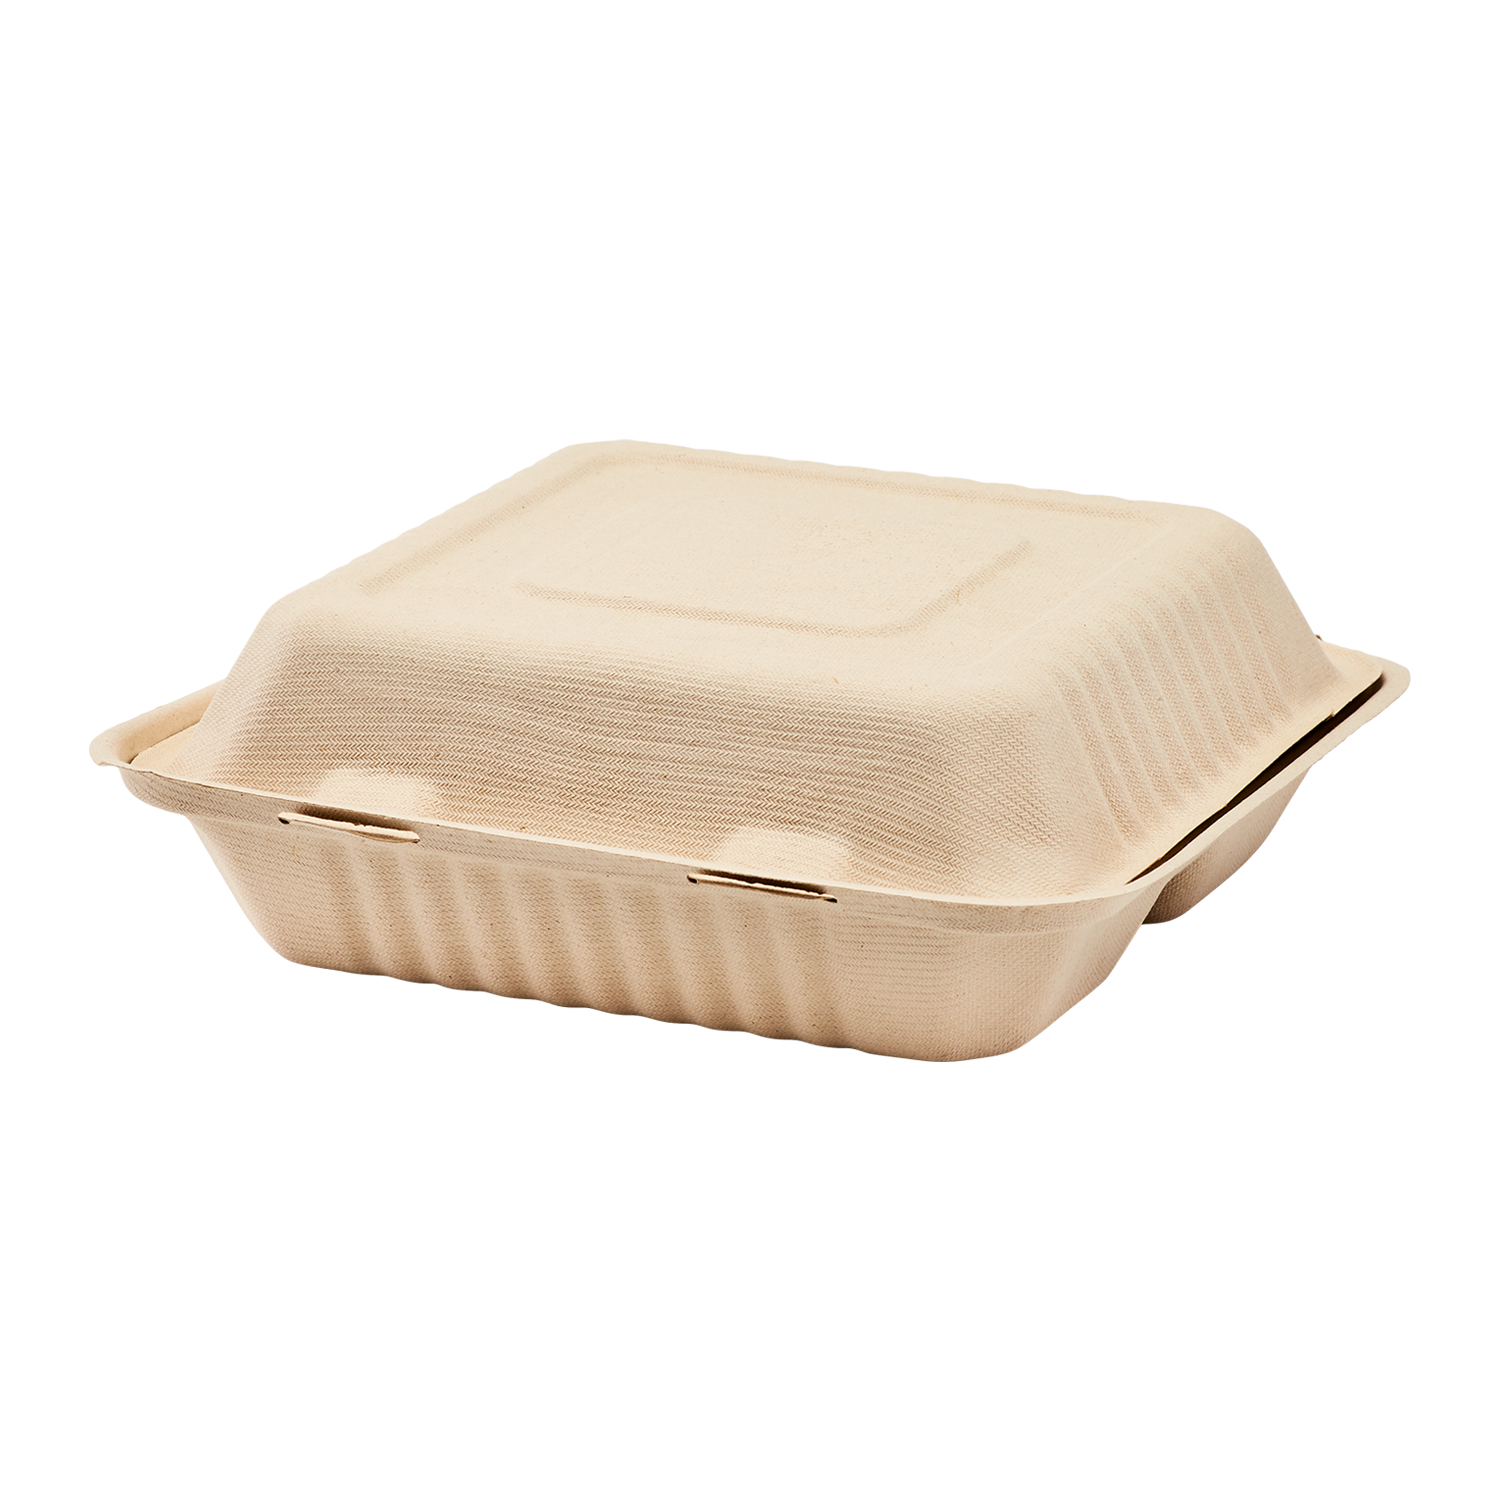 9'' x 9'' Flat Top 3-Compartment Food Container, 3.5 deep (Set of